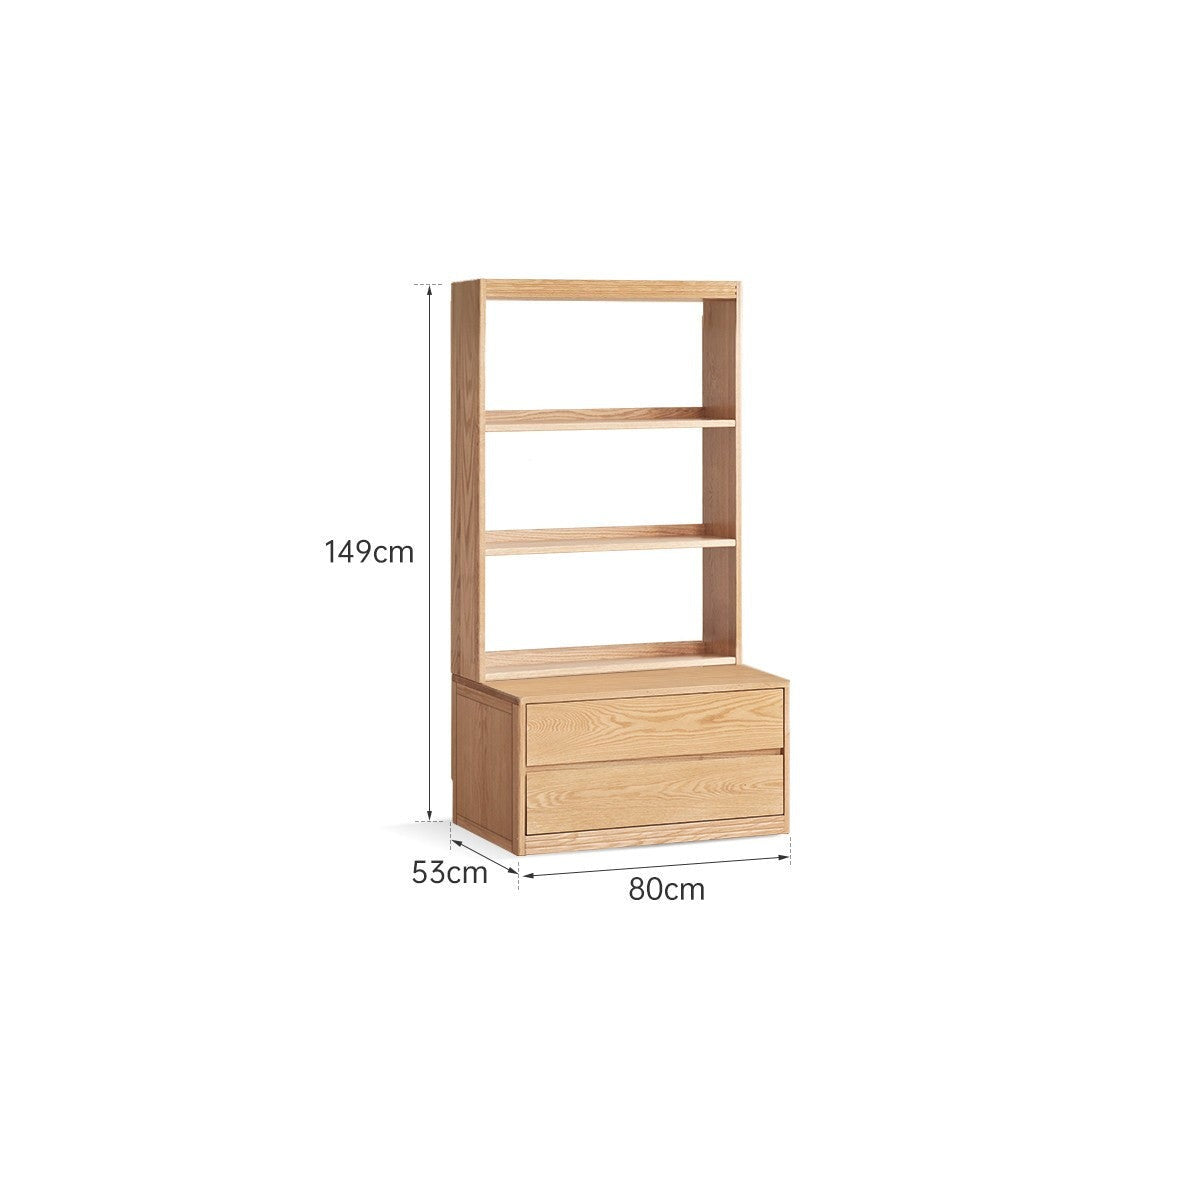 Oak solid wood wall-to-wall with seat combined bookshelf-